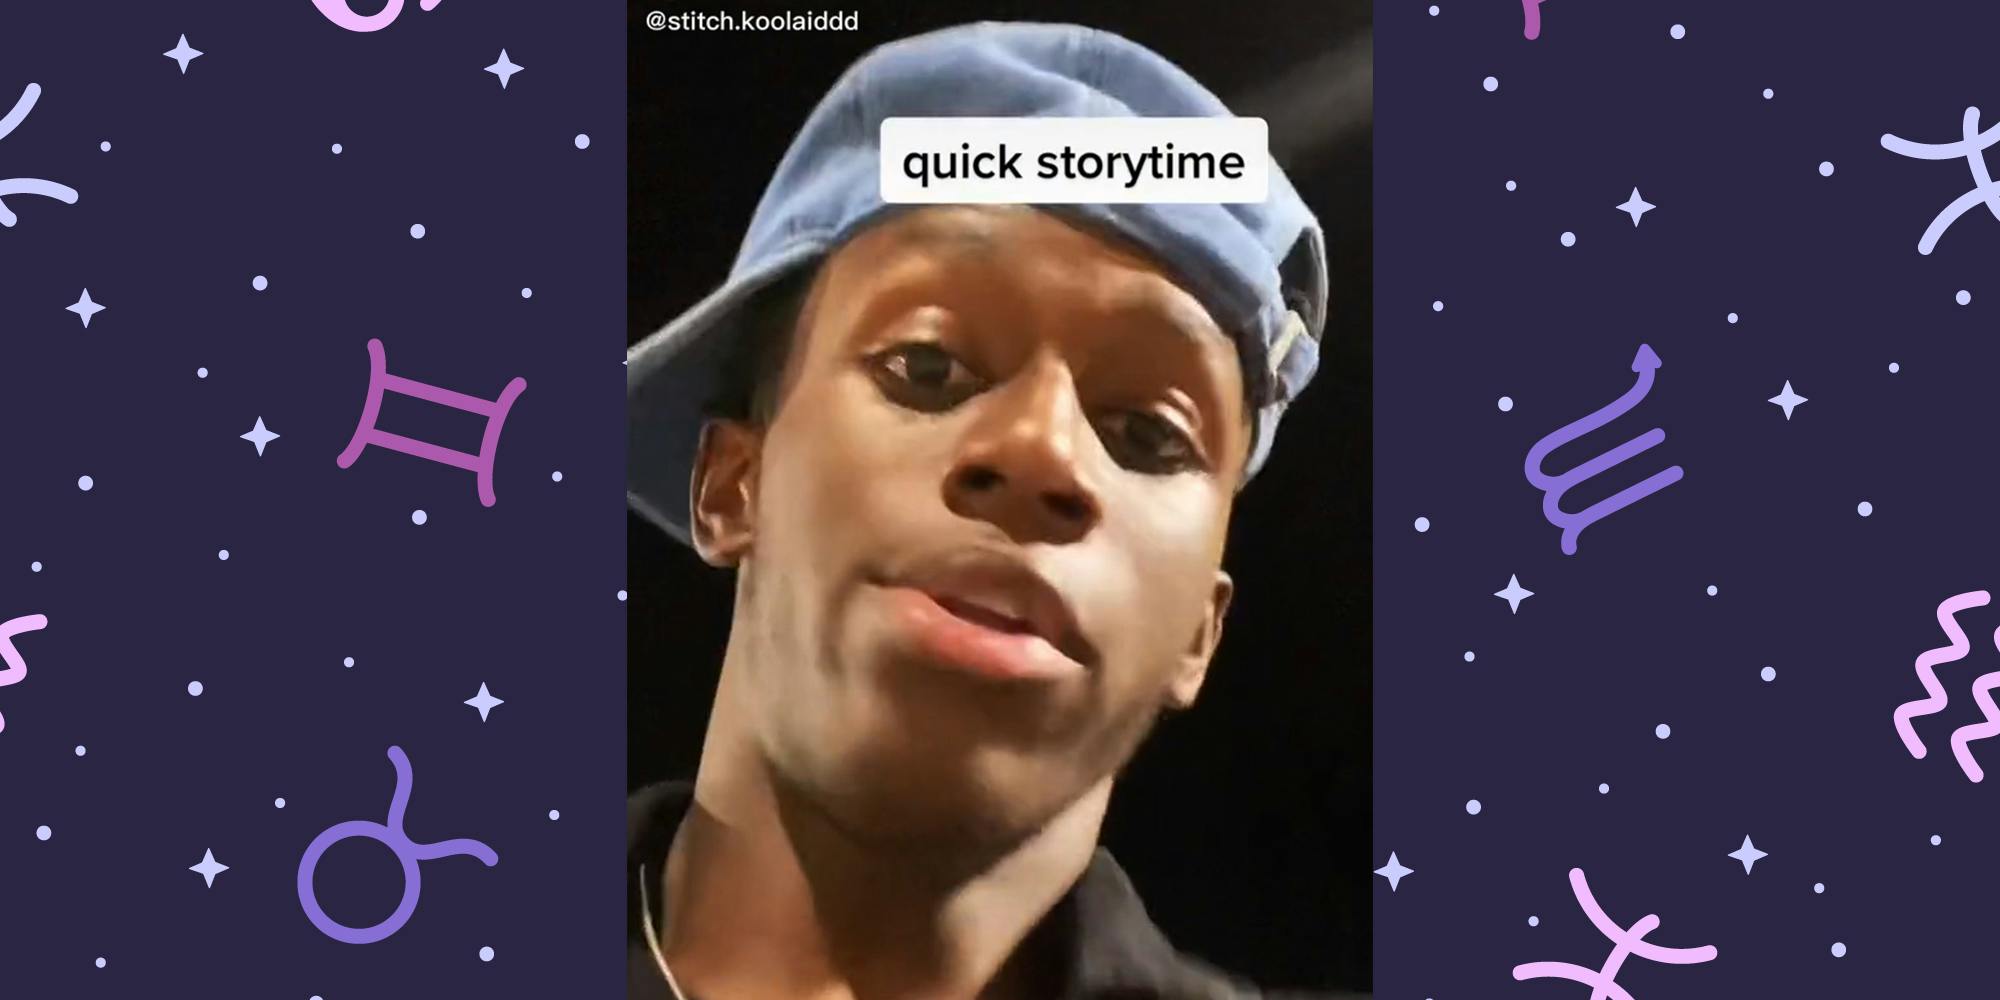 young man with "quick storytime" inset over astrology symbol background